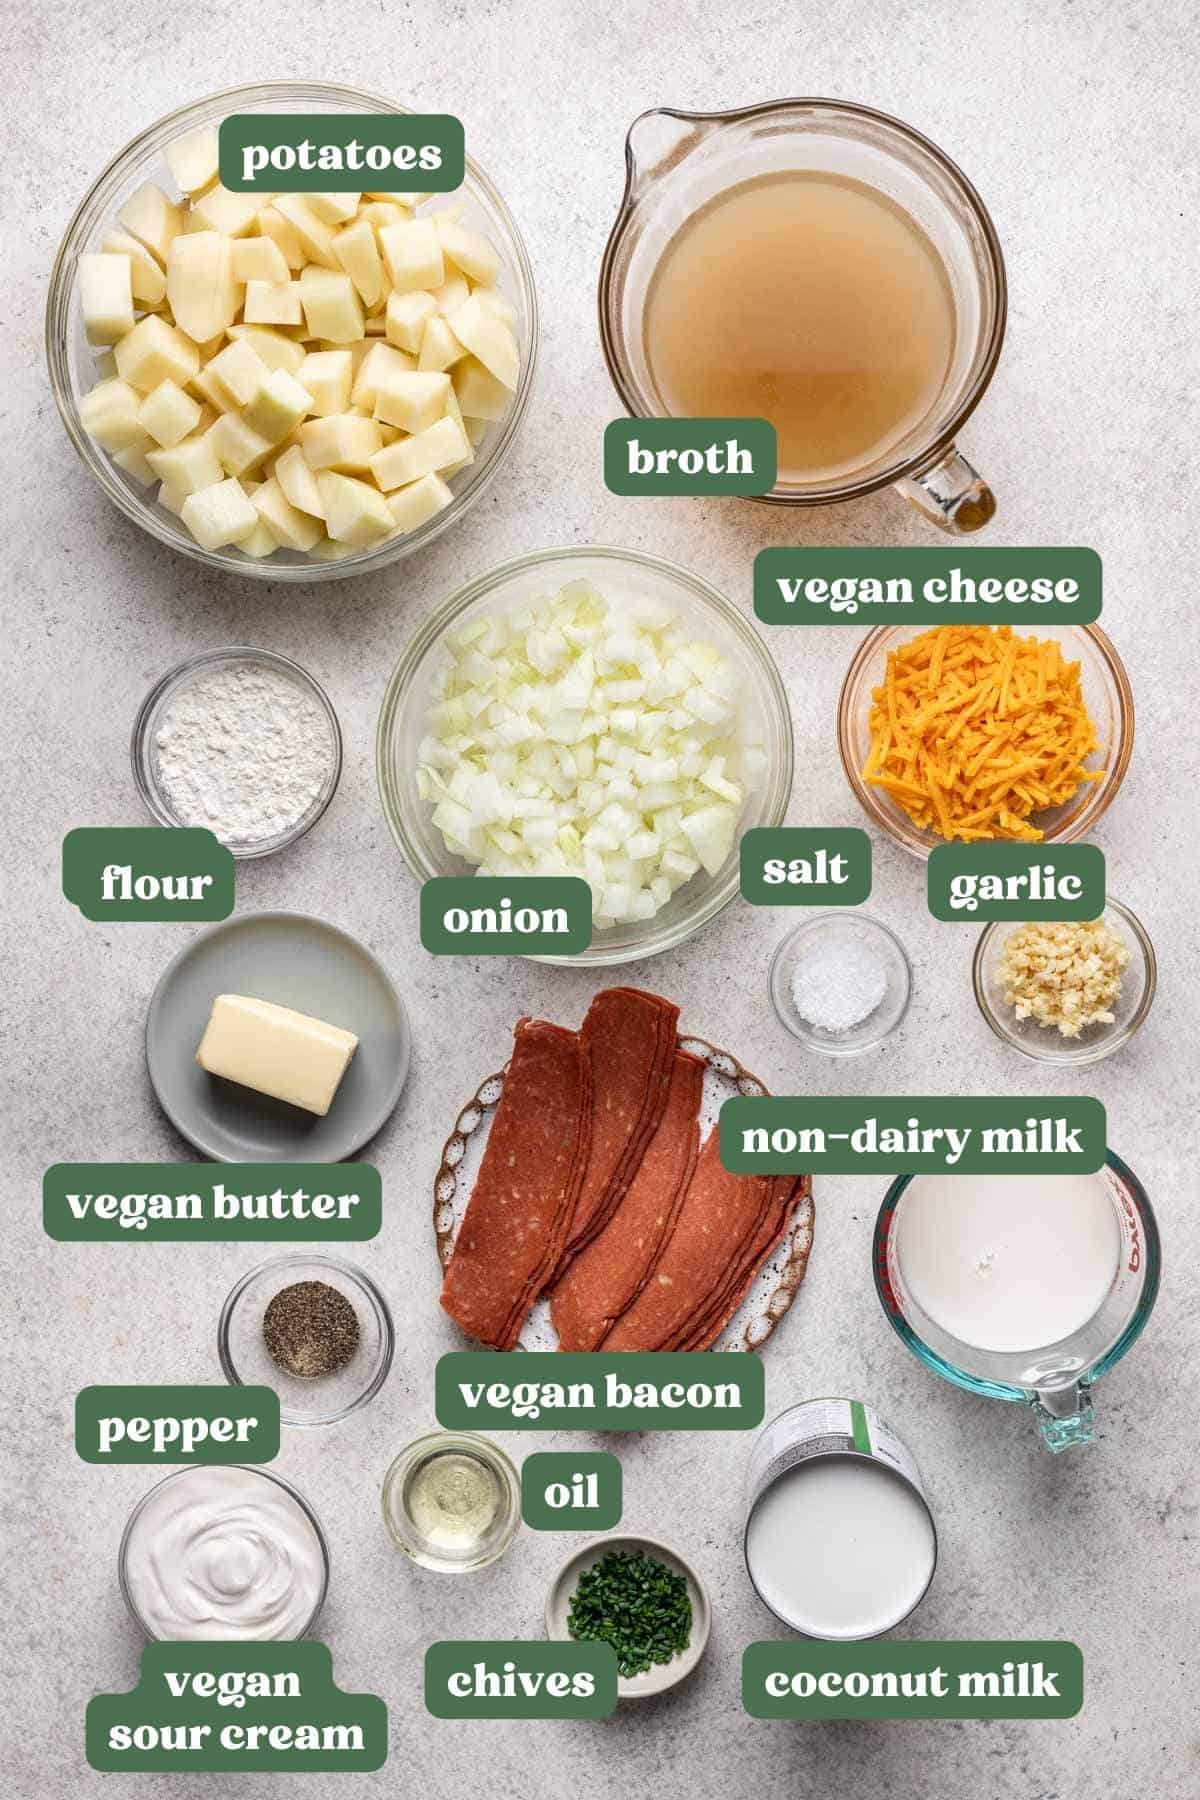 Ingredients you will need for vegan potato soup measured and labeled.